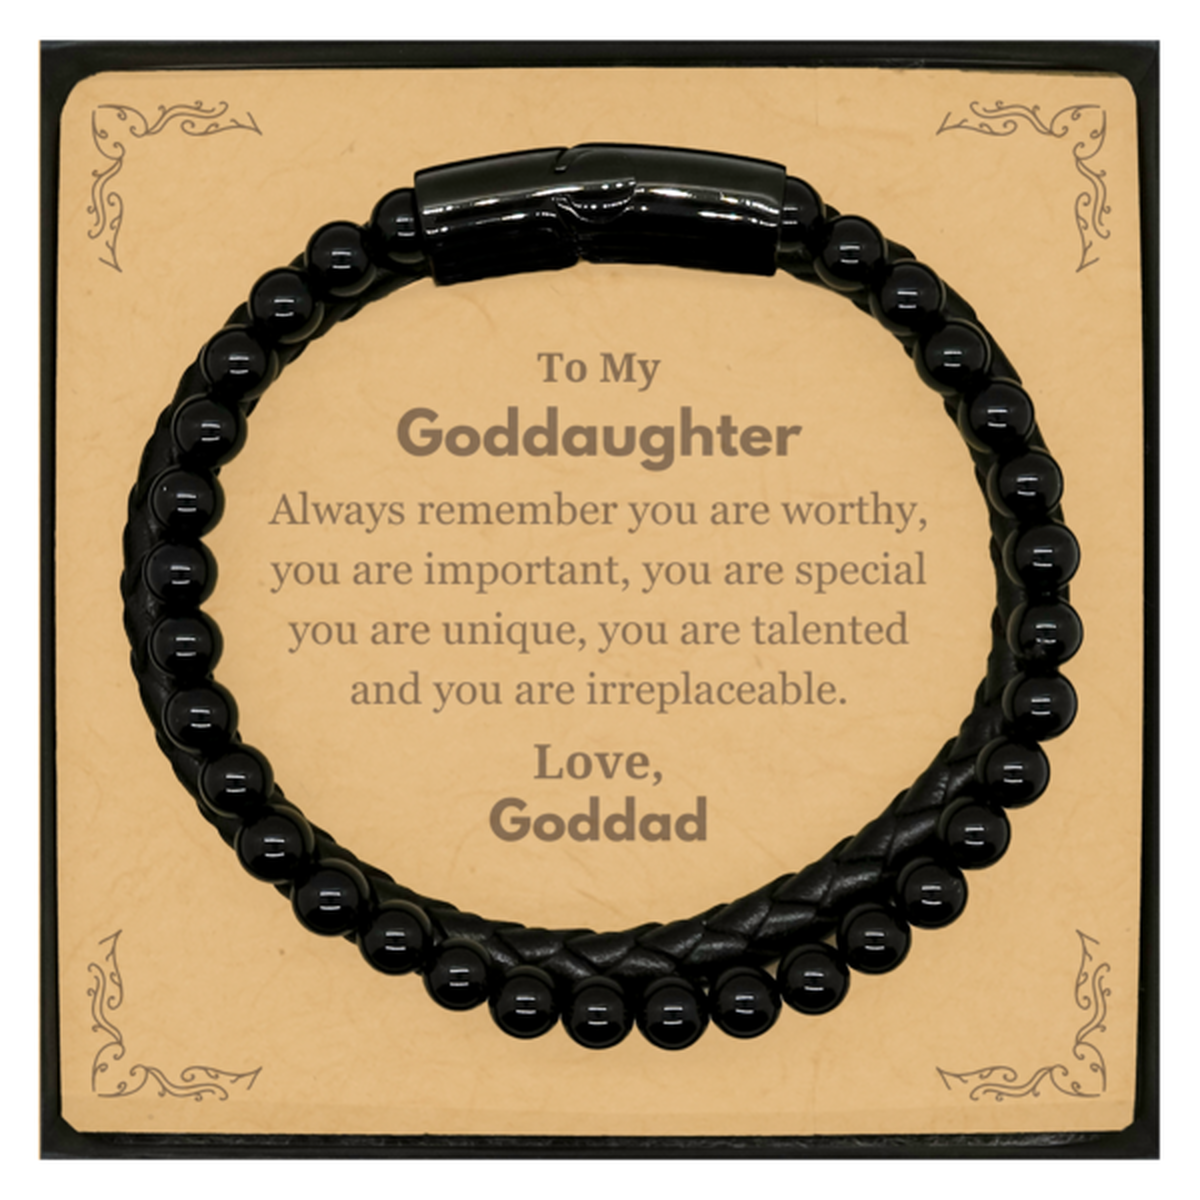 Goddaughter Birthday Gifts from Goddad, Inspirational Stone Leather Bracelets for Goddaughter Christmas Graduation Gifts for Goddaughter Always remember you are worthy, you are important. Love, Goddad